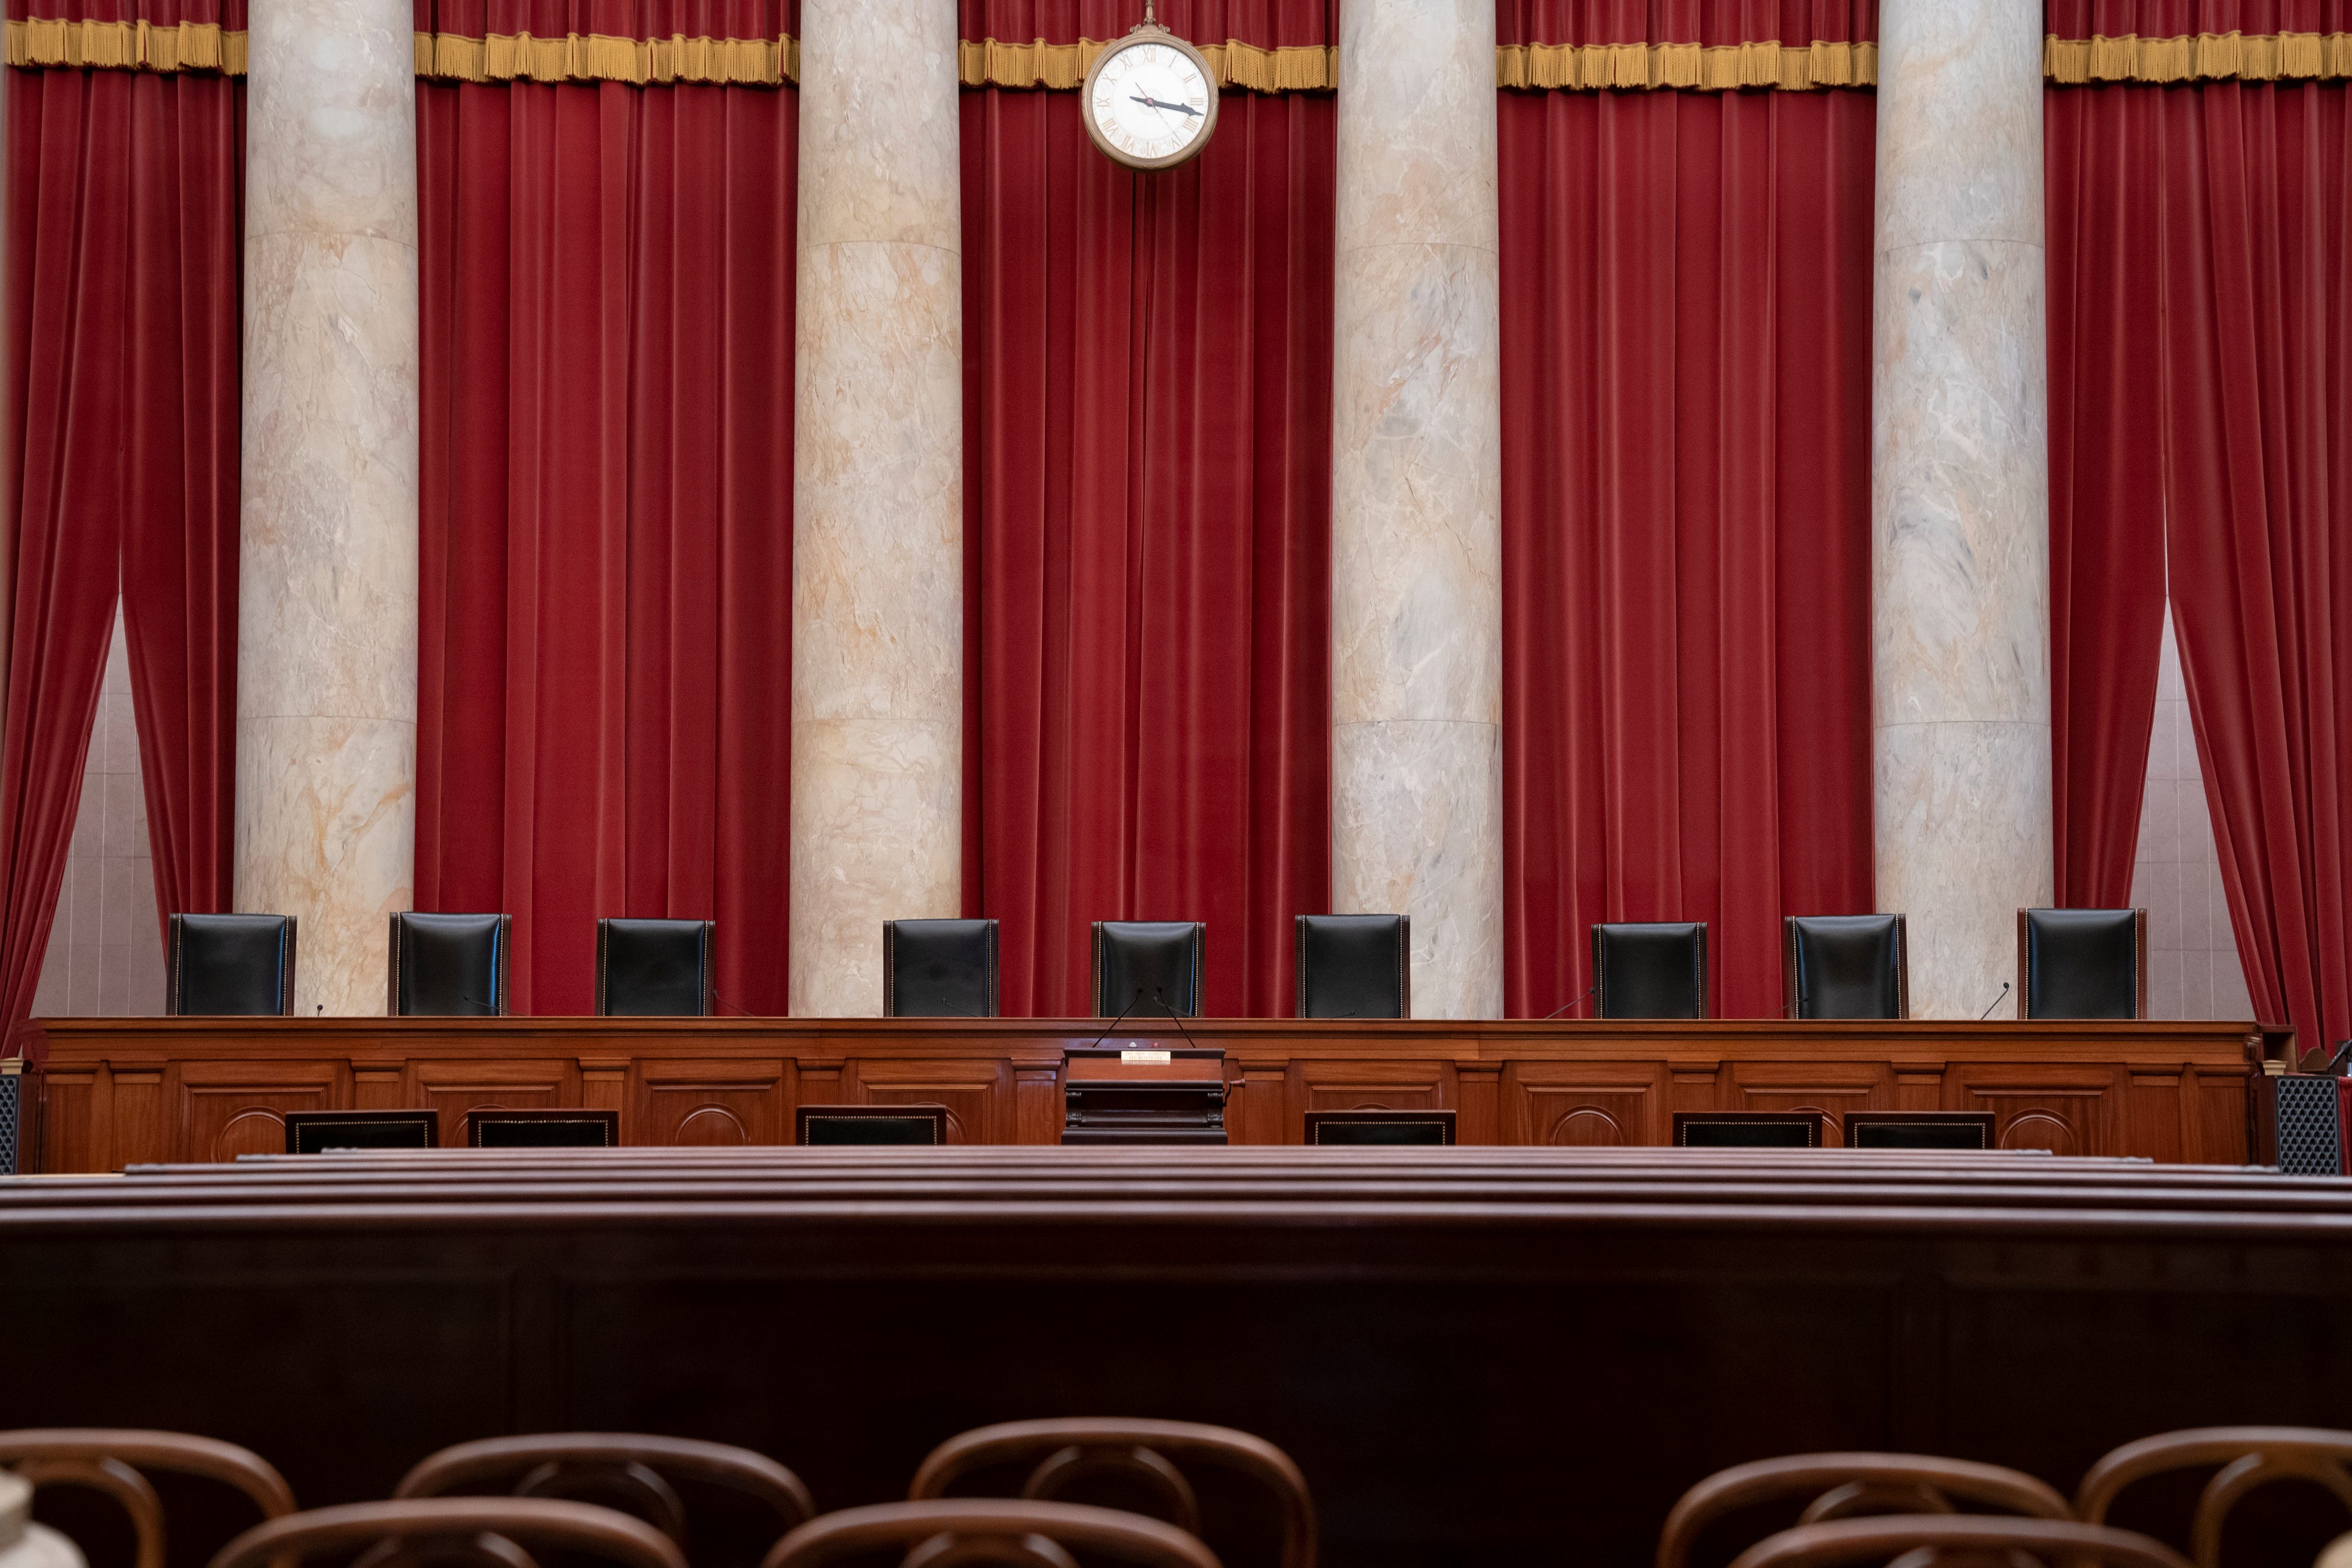 Some Democratic lawmakers have proposed adding four chairs to the nine justices’ seats on the Supreme Court bench.